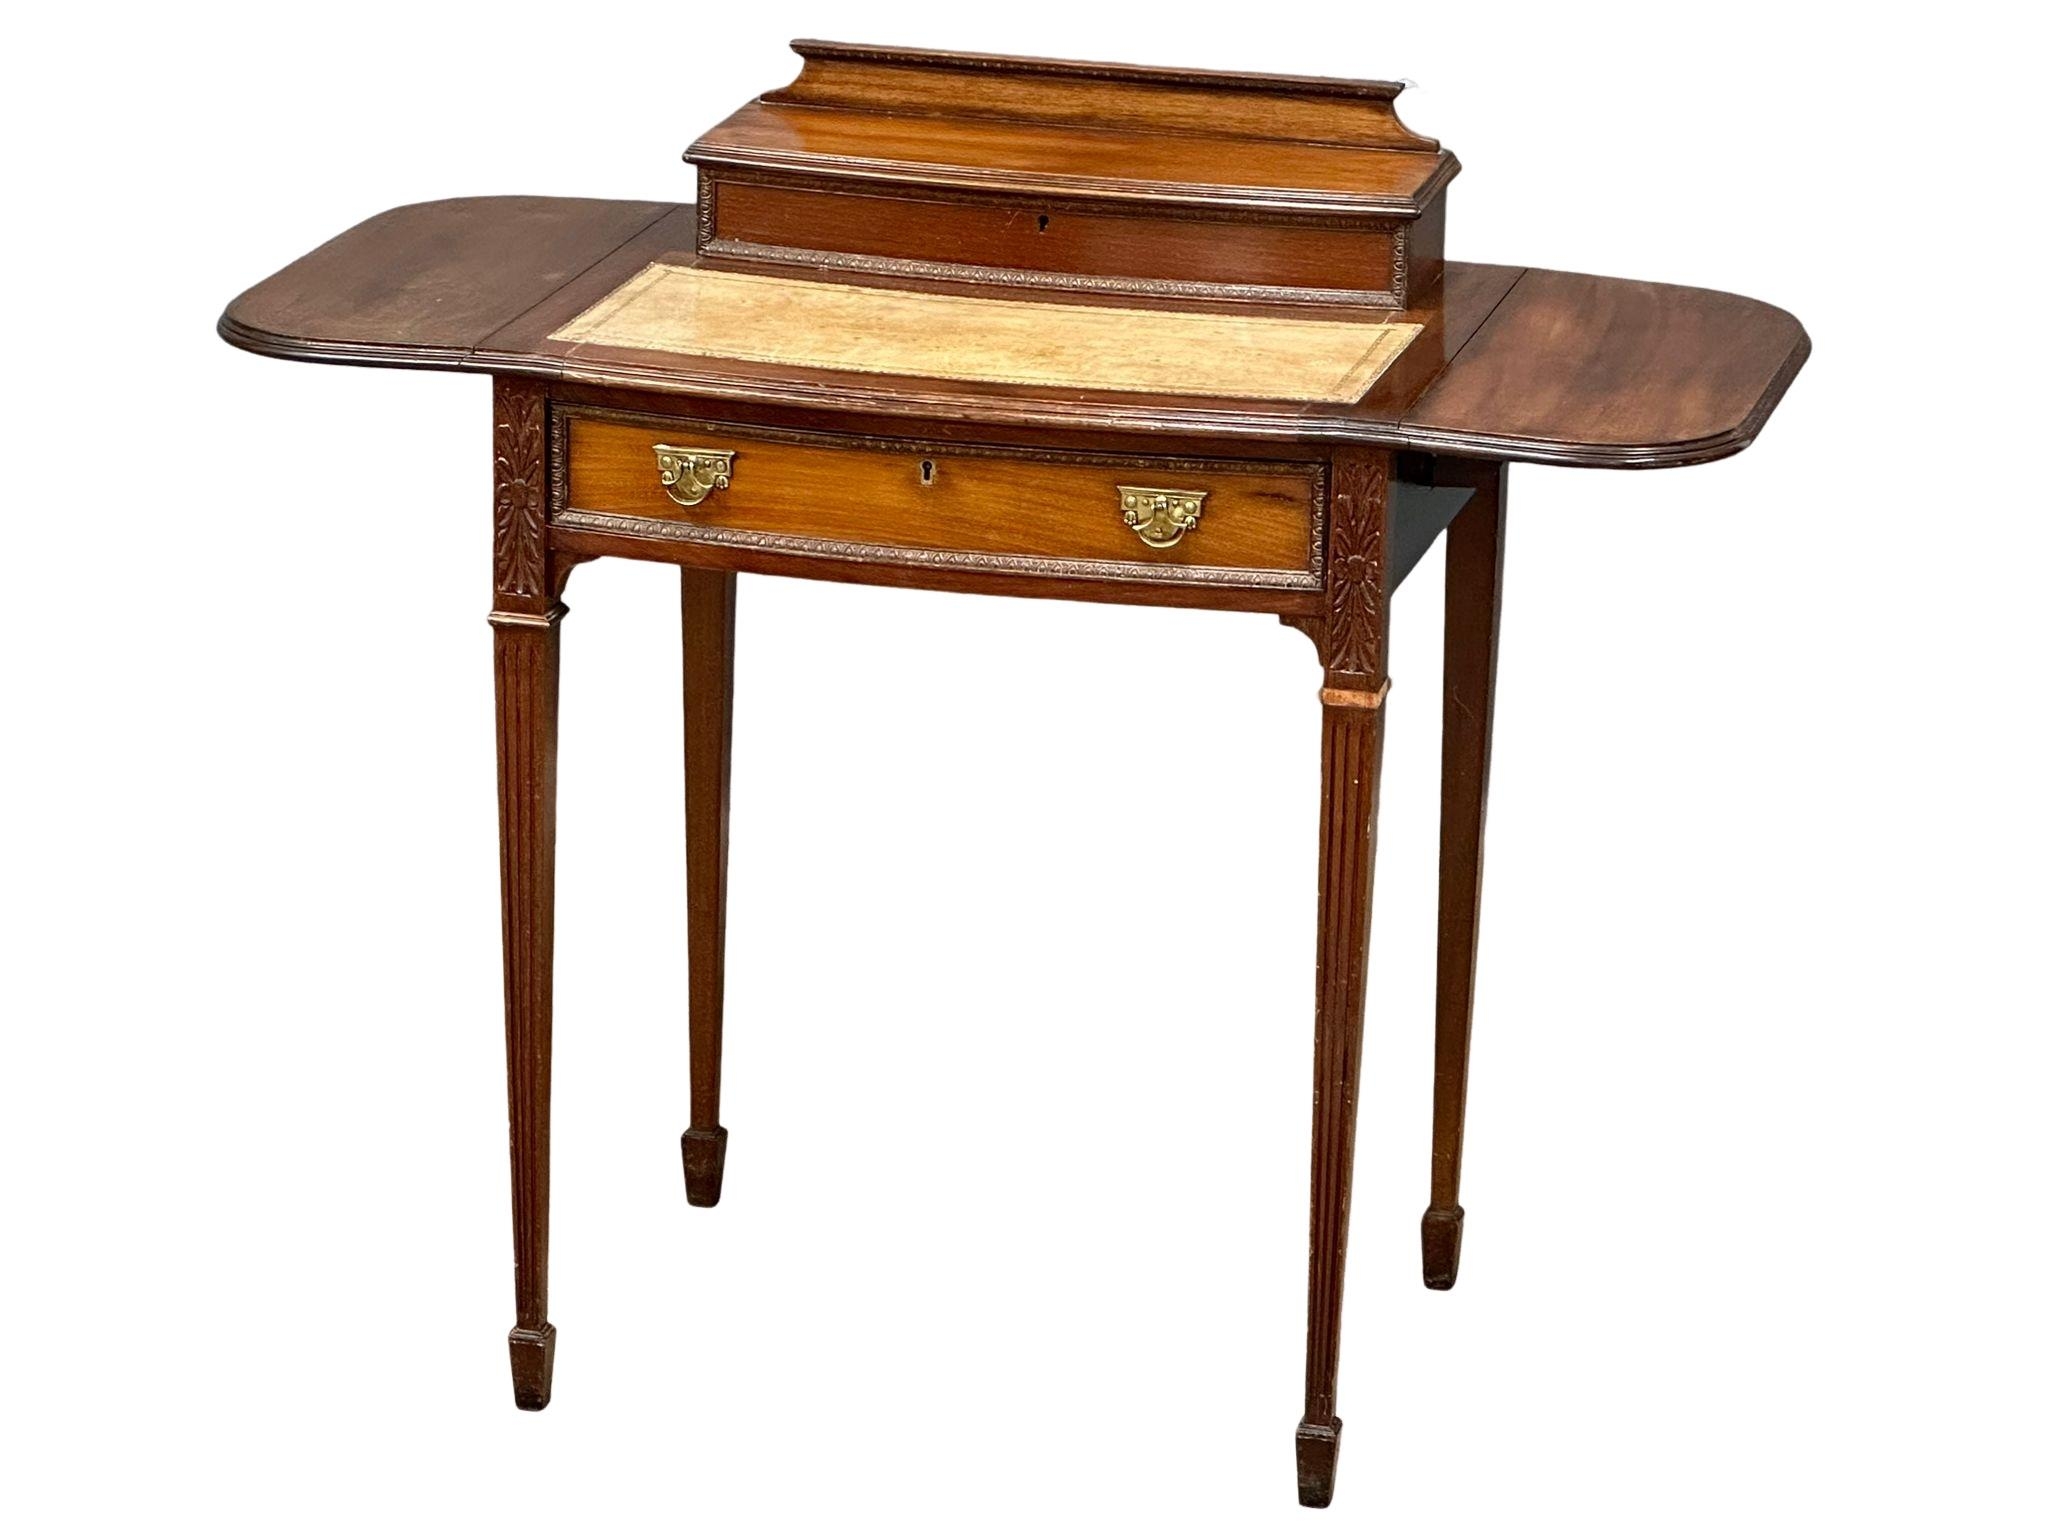 An Early 20th Century Hepplewhite Revival mahogany drop leaf writing table. Circa 1900-1910. - Image 7 of 7